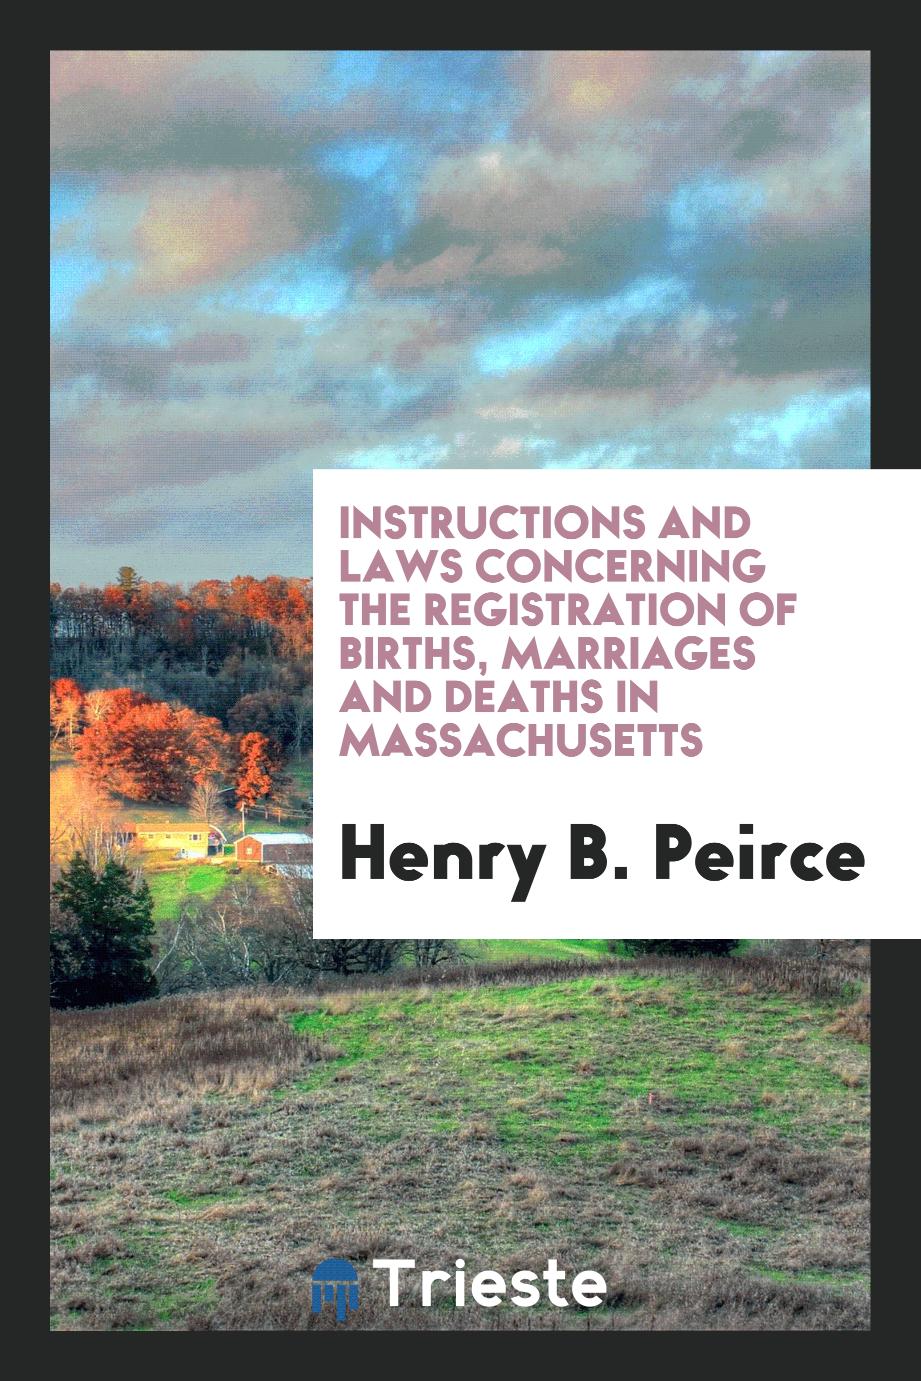 Instructions and Laws Concerning the Registration of Births, Marriages and Deaths in Massachusetts